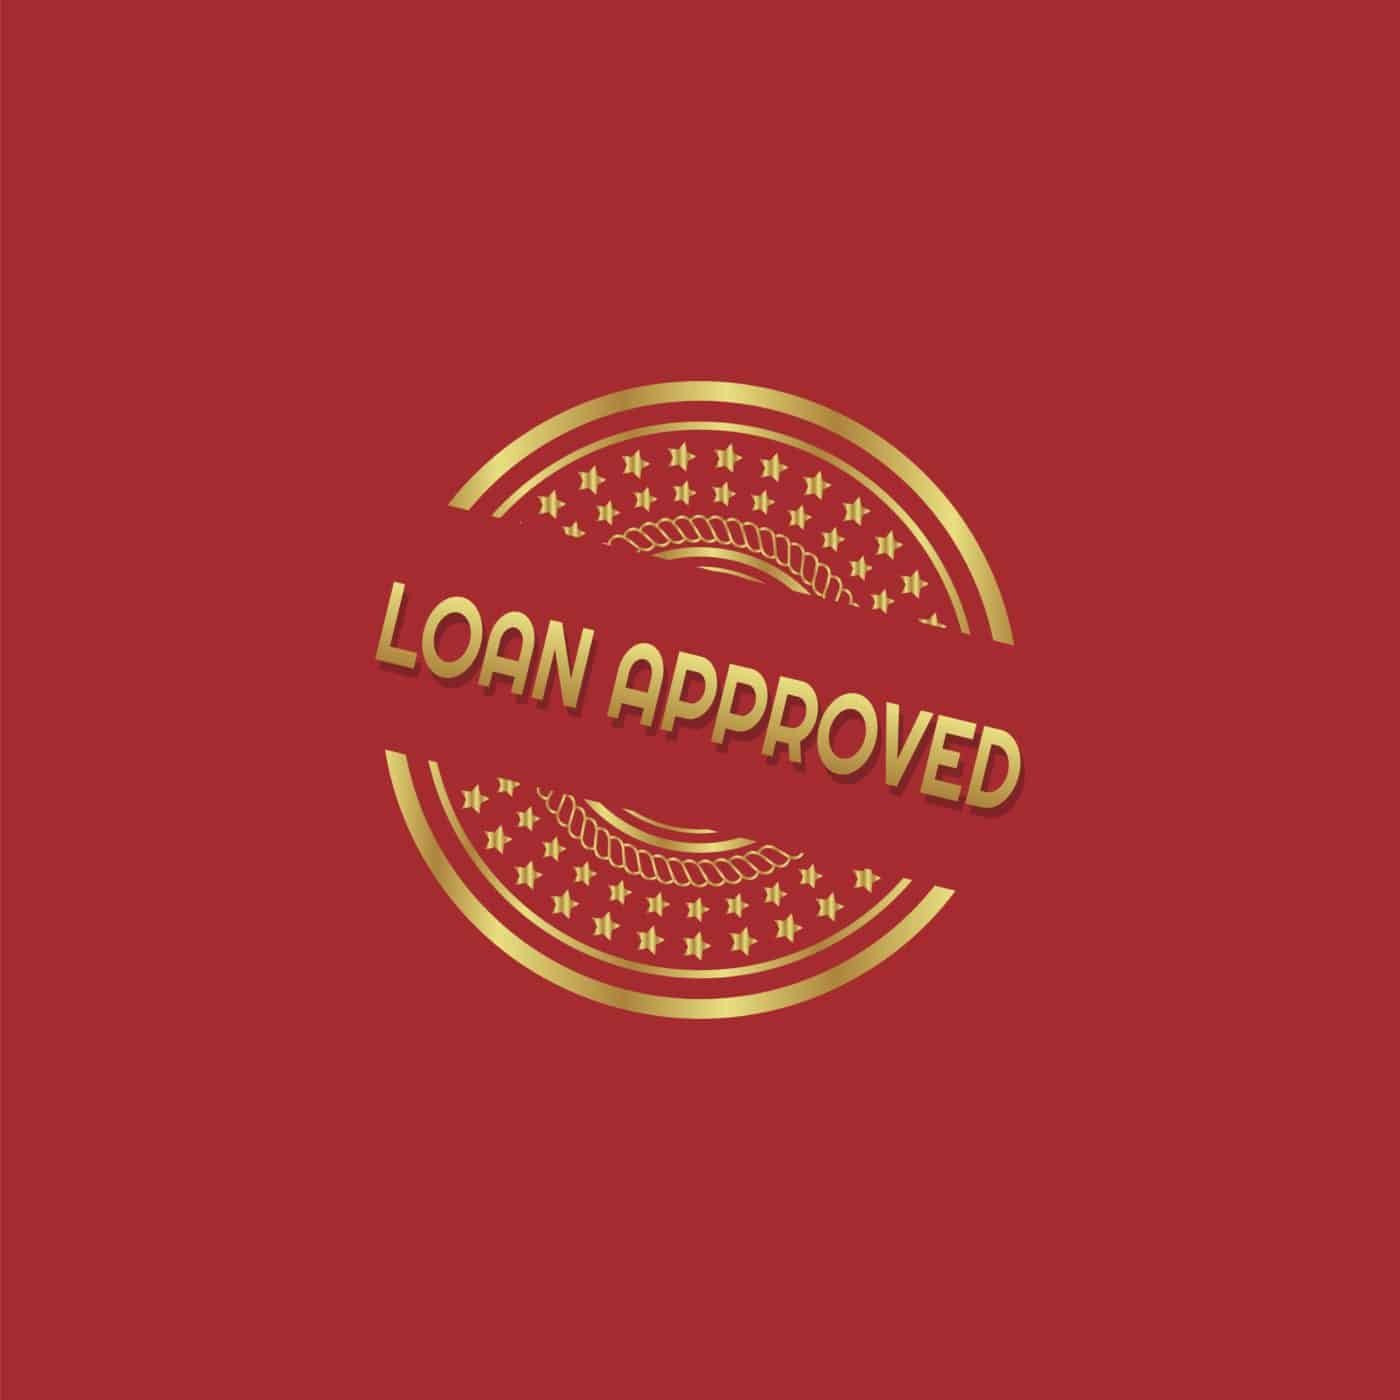 LOAN APPROVED